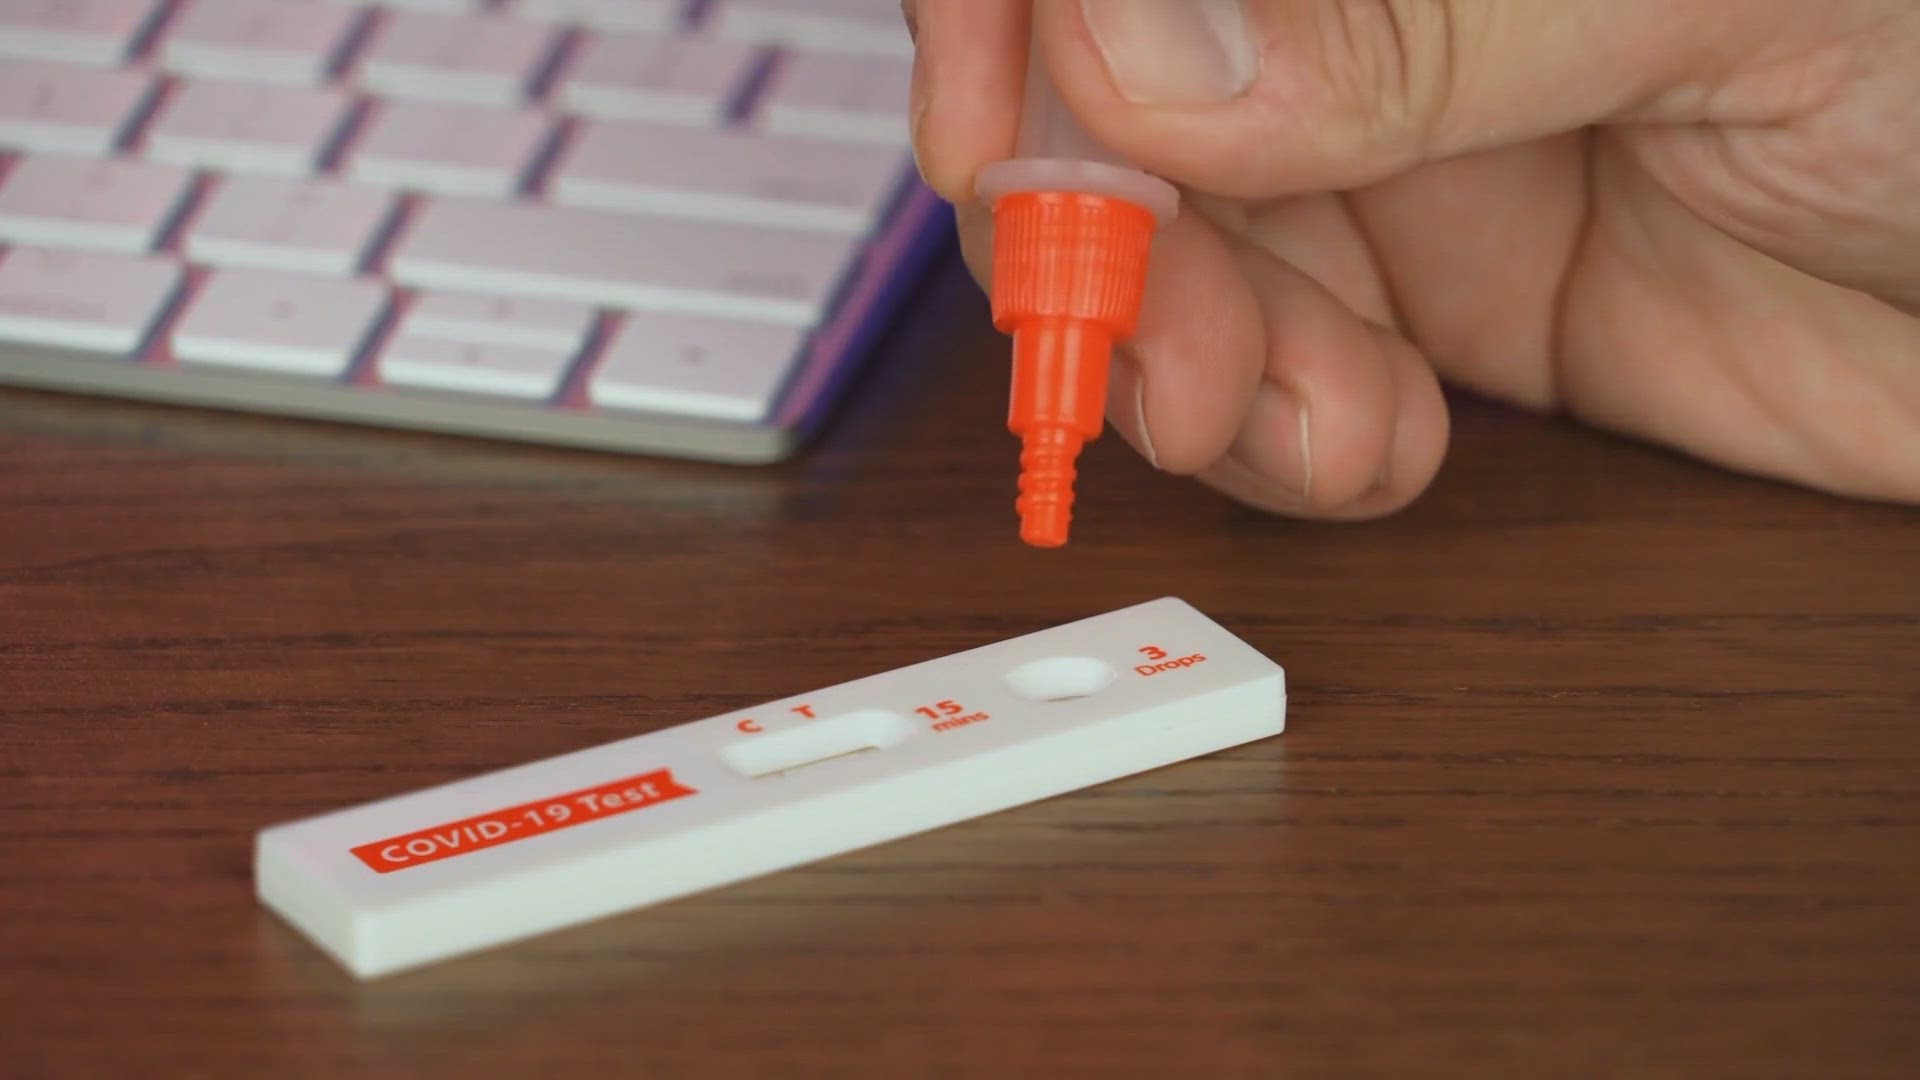 One thing users need to make sure of: that their at-home test kit isn't expired.